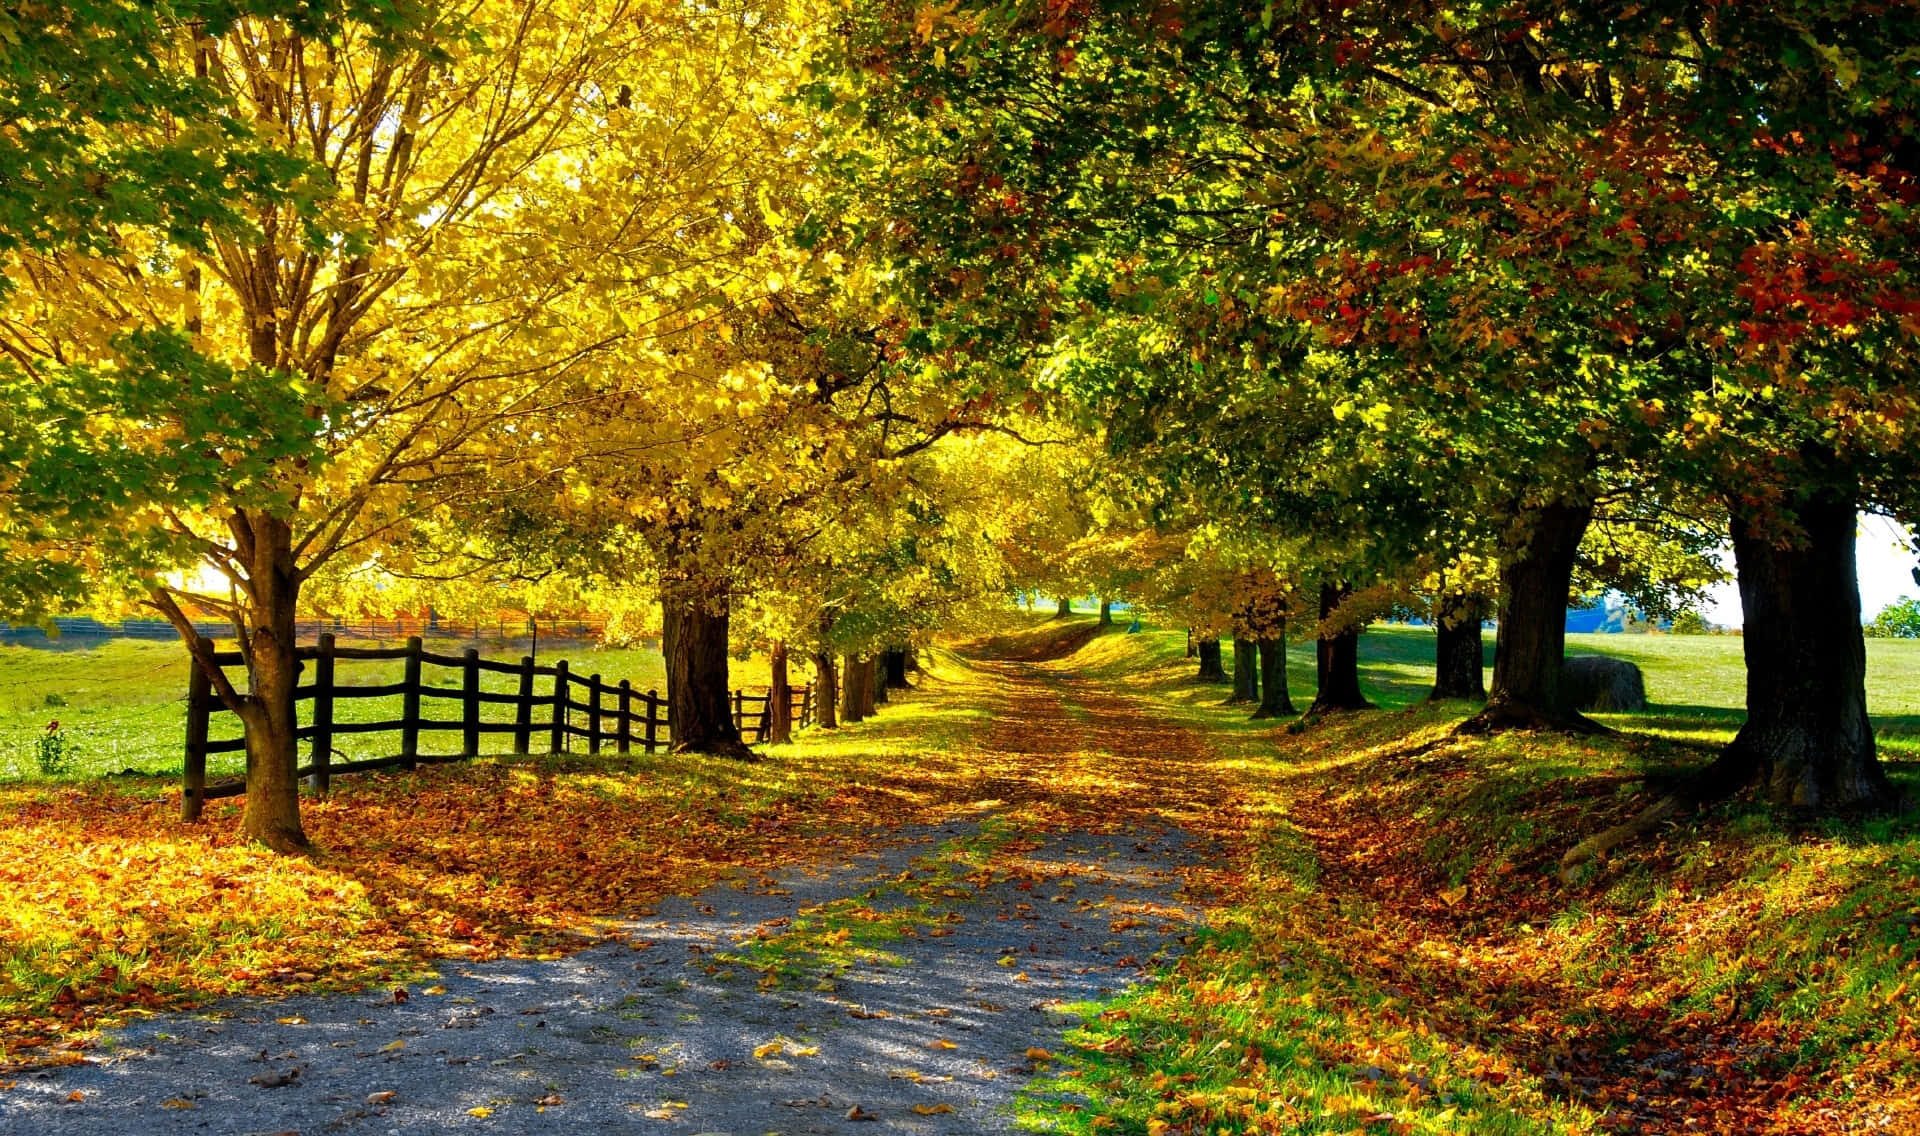 Tranquil autumn scene in Fall Country Wallpaper